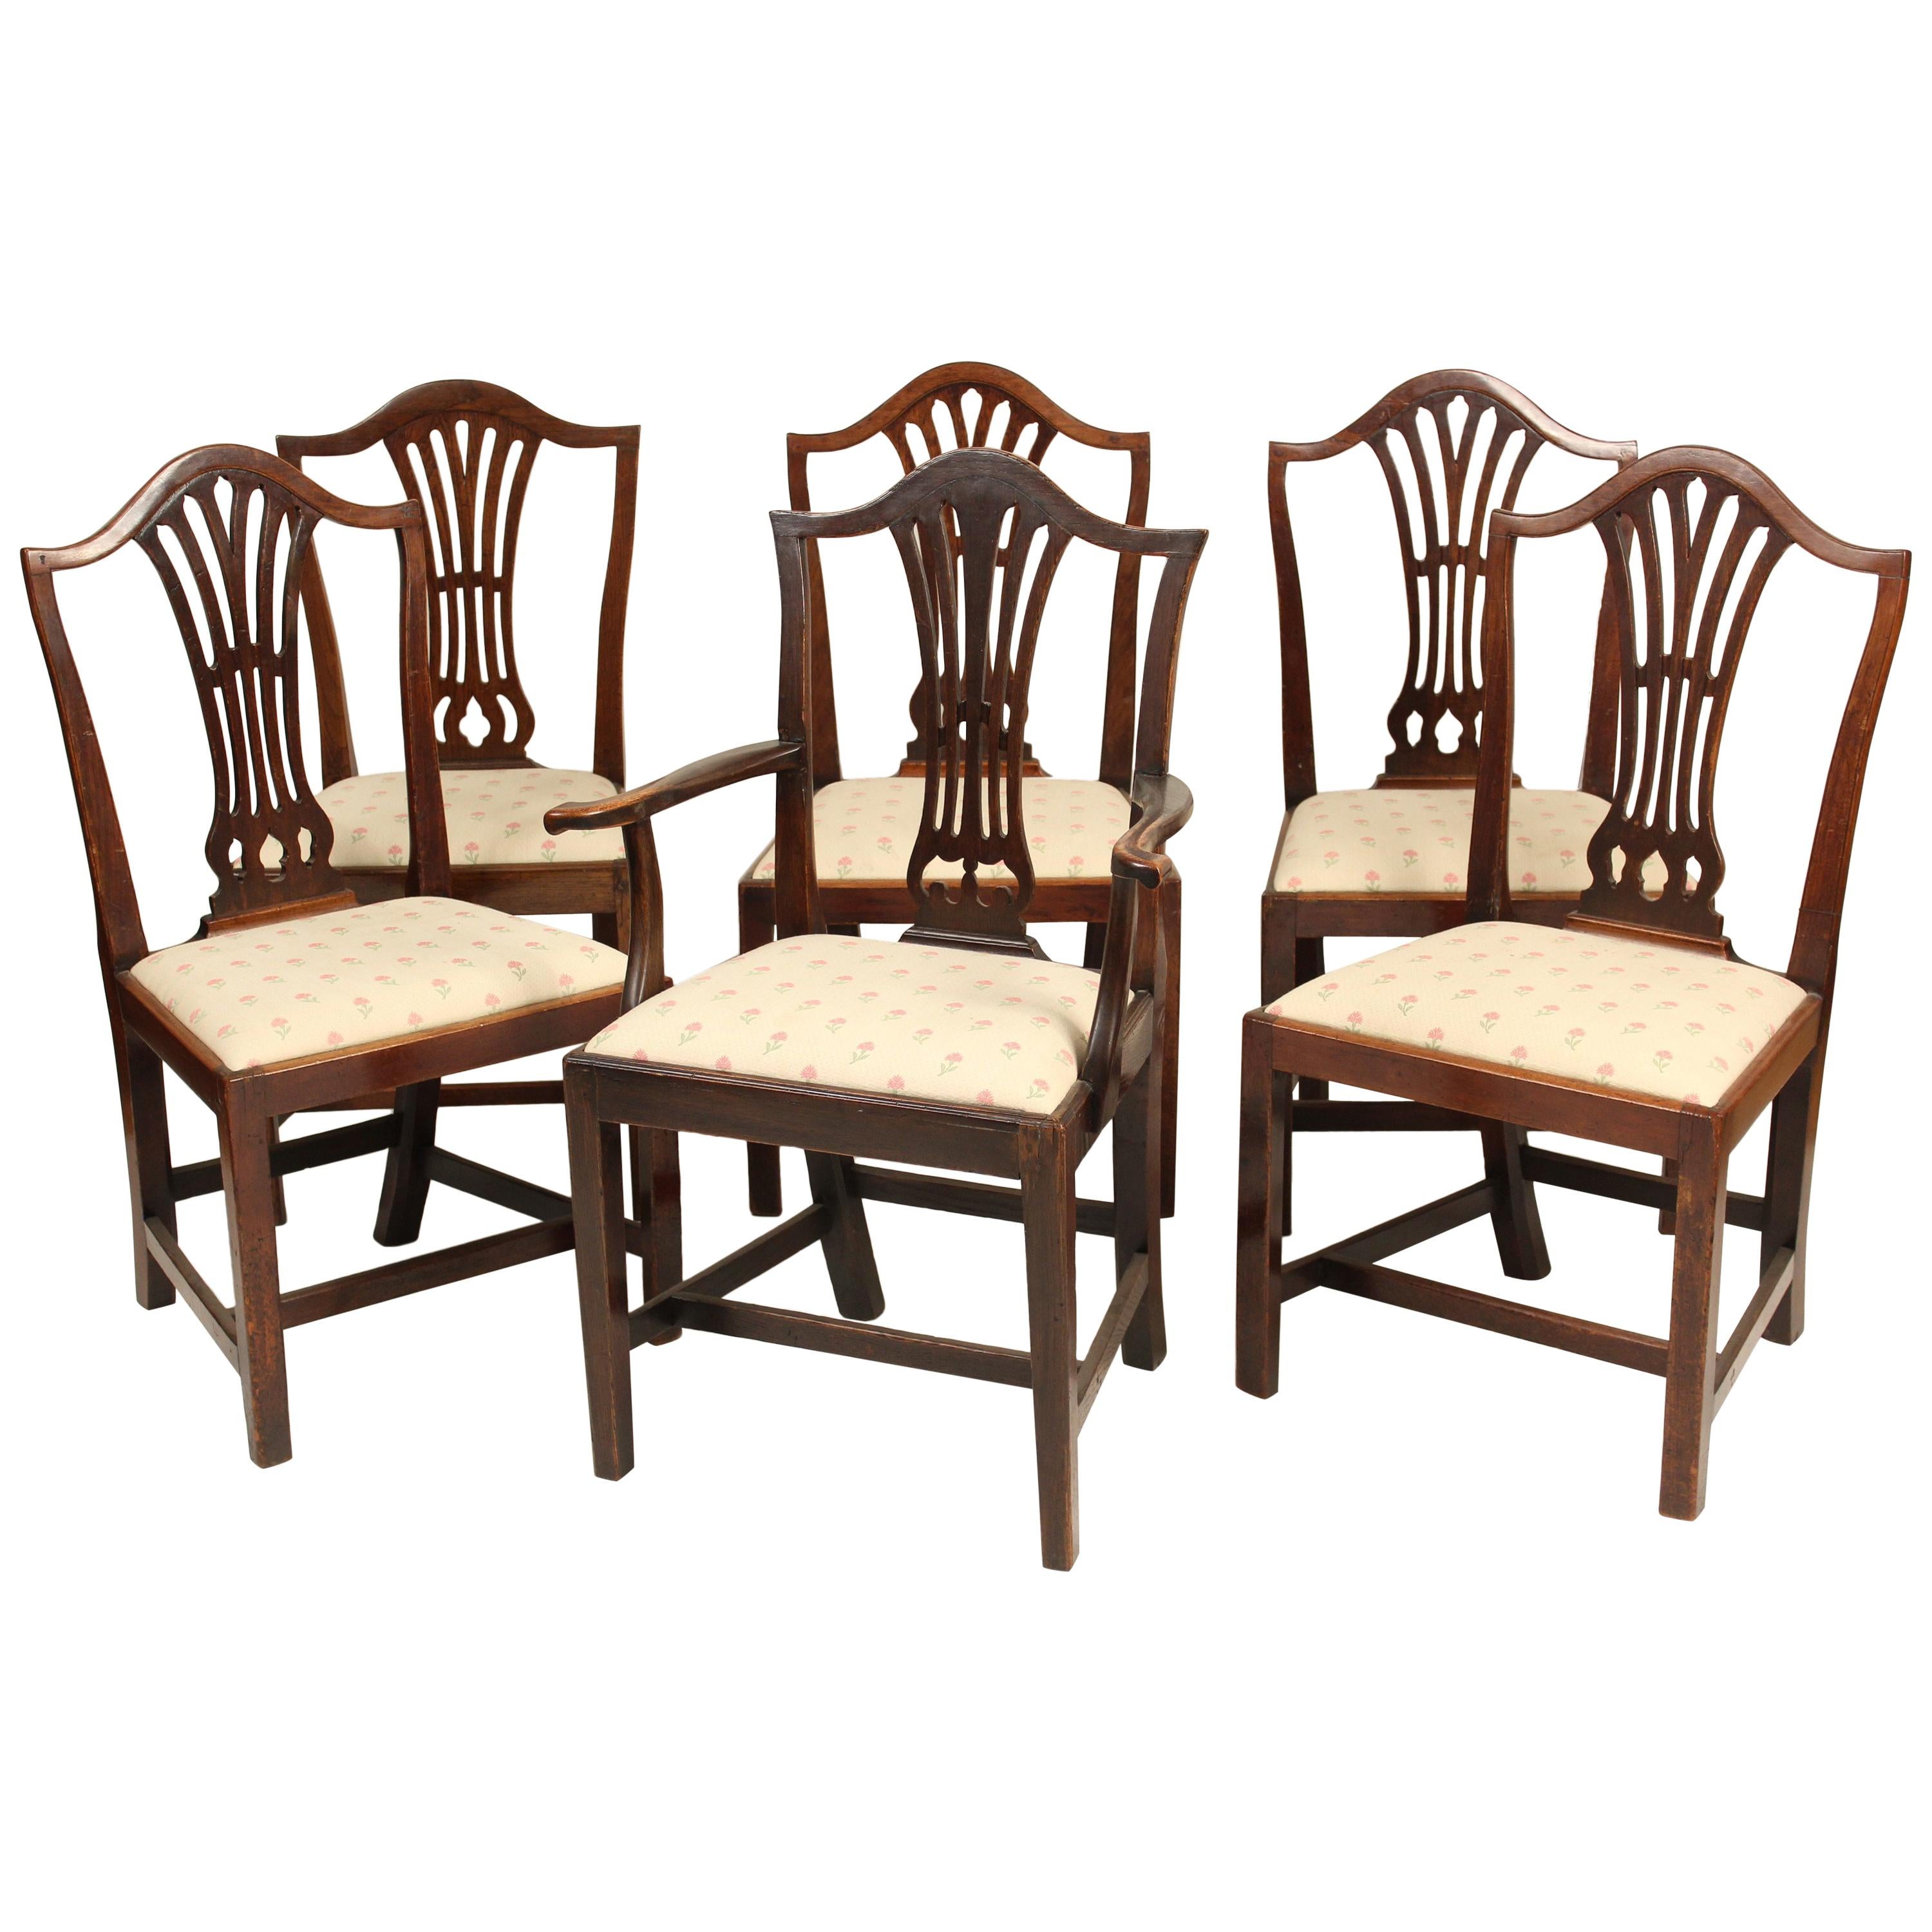 Matched Set of 6 Antique George III Style Dining Room Chairs